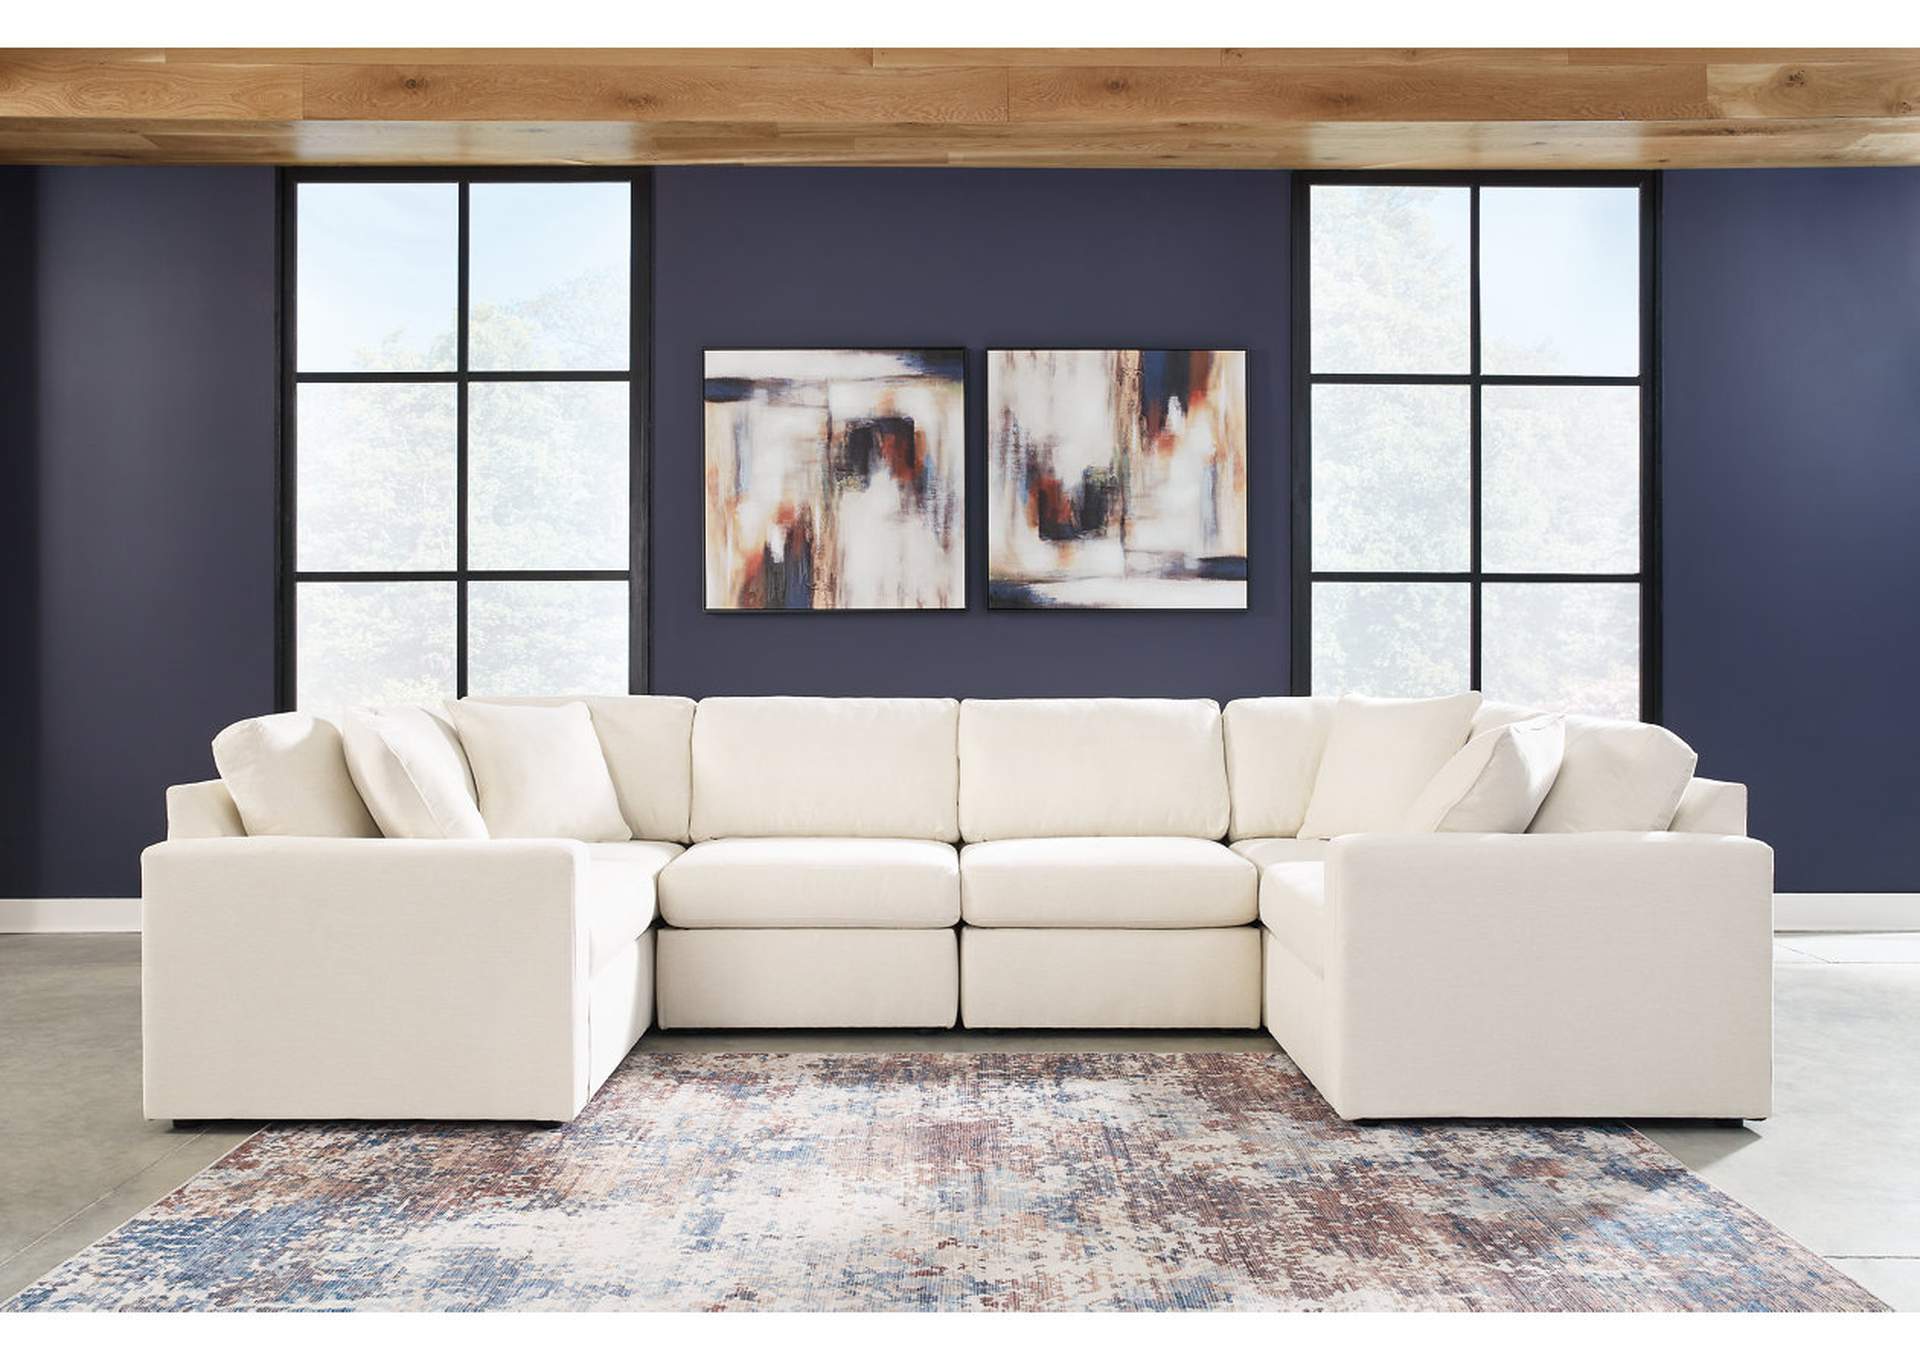 Pillar Peak 6-Piece Sectional with Ottoman,Signature Design By Ashley